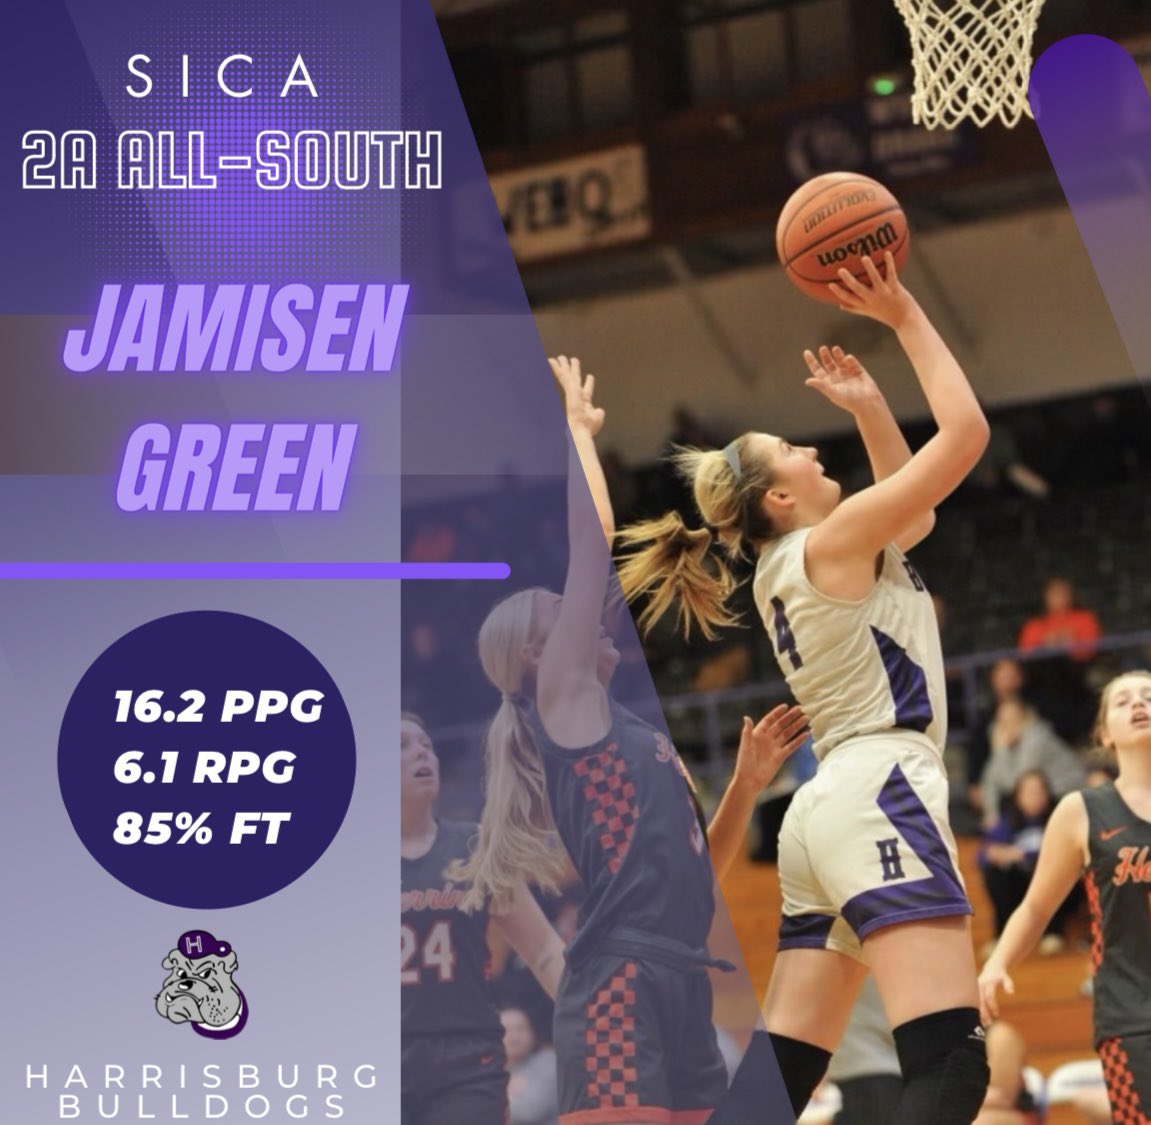 Congrats to sophomore, Jamisen Green on making the SICA All South team! We are proud of you! #PPEW